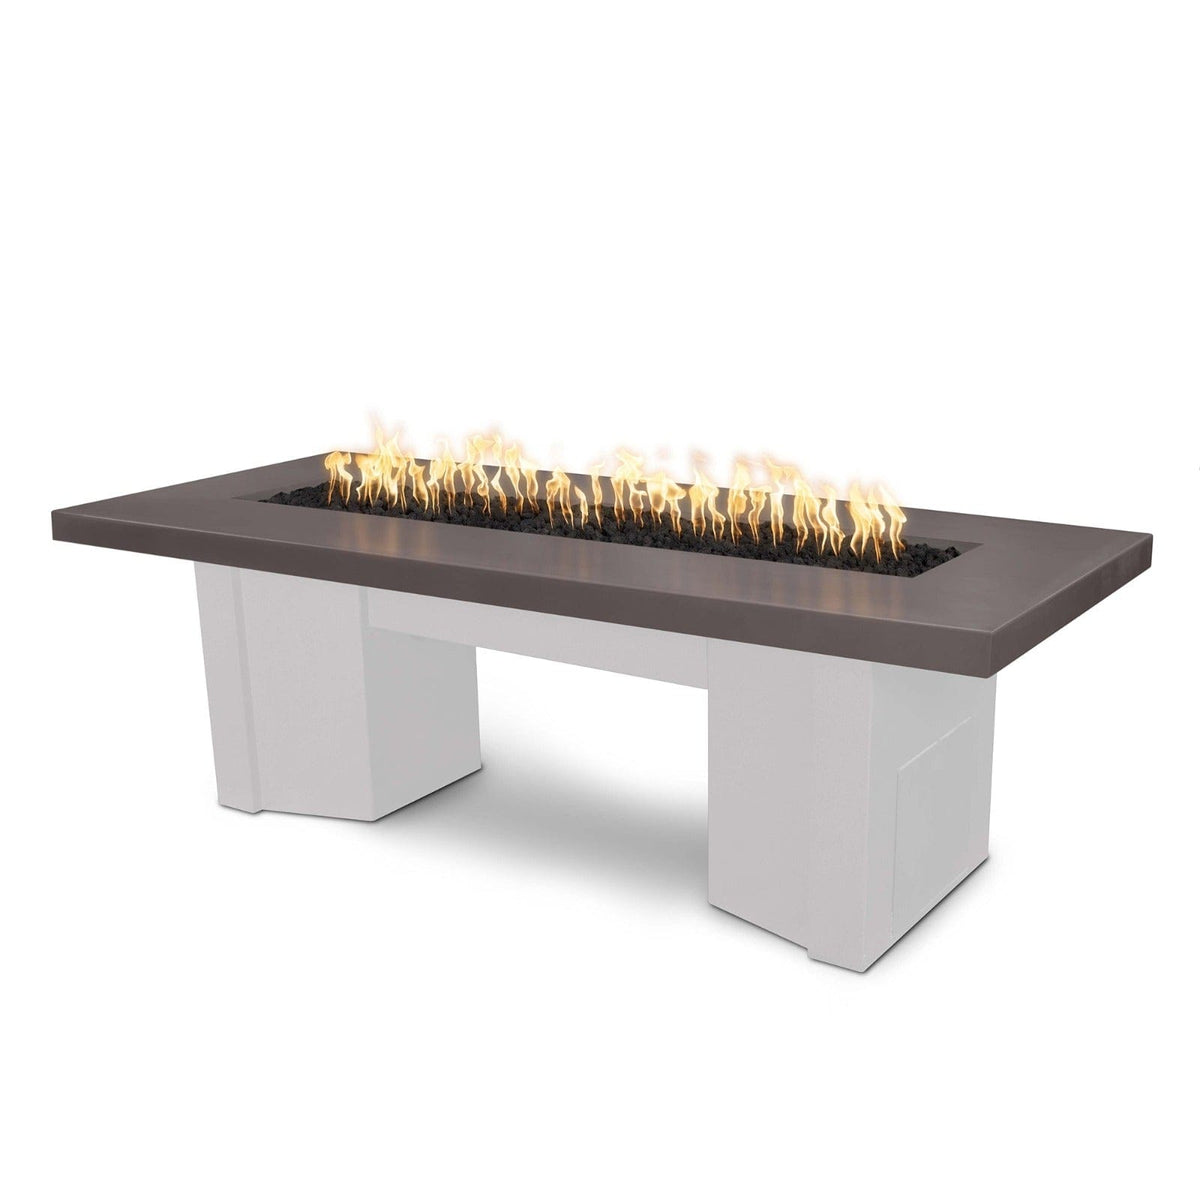 The Outdoor Plus Fire Features Chestnut (-CST) / White Powder Coated Steel (-WHT) The Outdoor Plus 60&quot; Alameda Fire Table Smooth Concrete in Liquid Propane - Flame Sense System with Push Button Spark Igniter / OPT-ALMGFRC60FSEN-LP